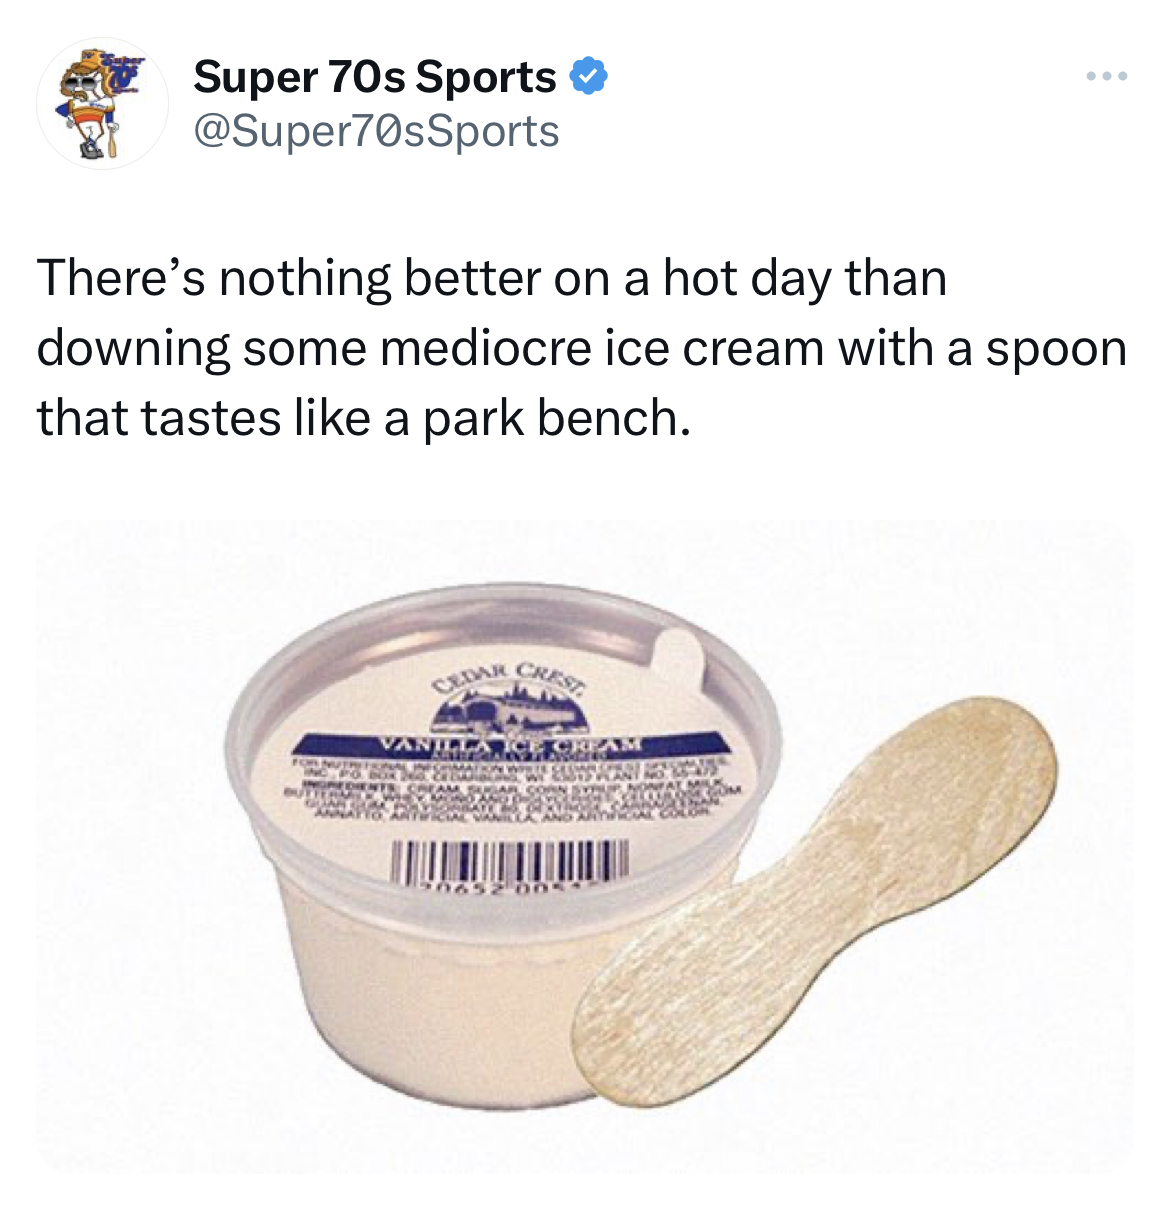 hall of fame tweets -vanilla ice cream cup - Super 70s Sports There's nothing better on a hot day than downing some mediocre ice cream with a spoon that tastes a park bench. Cedar Crest Vanilla Wam Sacra